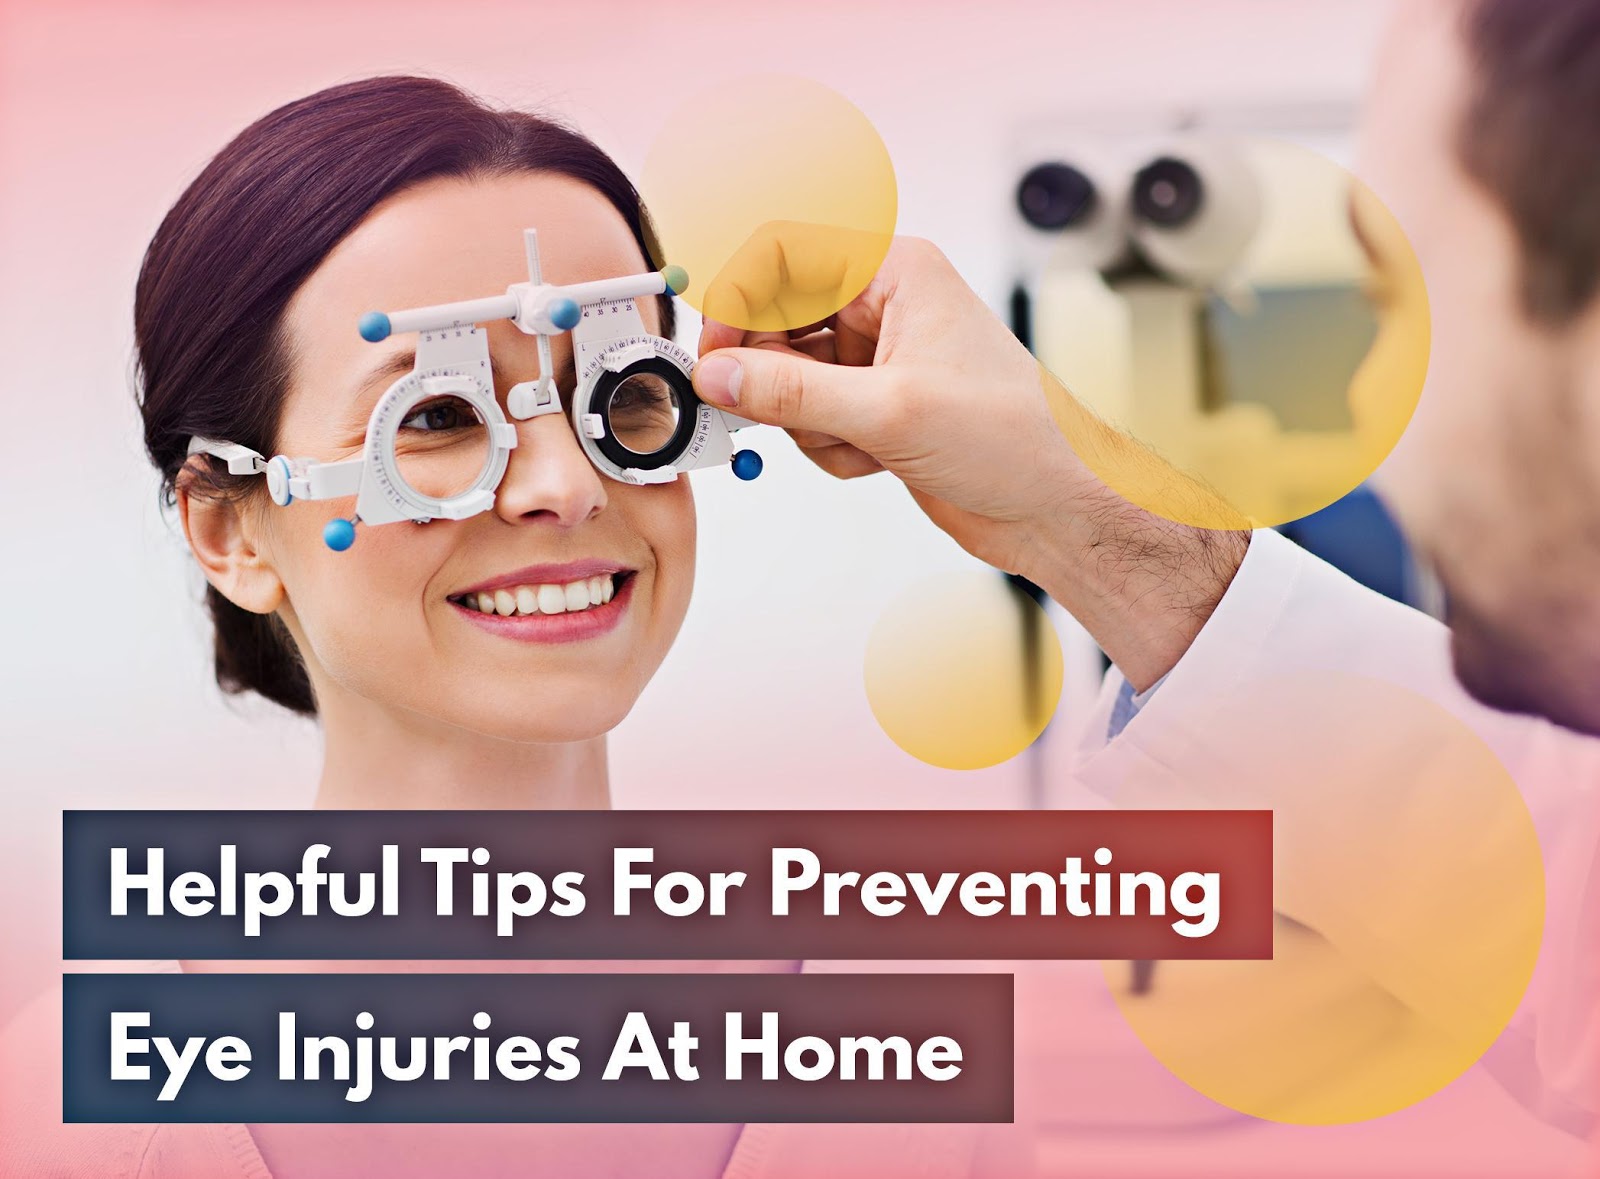 Helpful Tips for Preventing Eye Injuries at Home